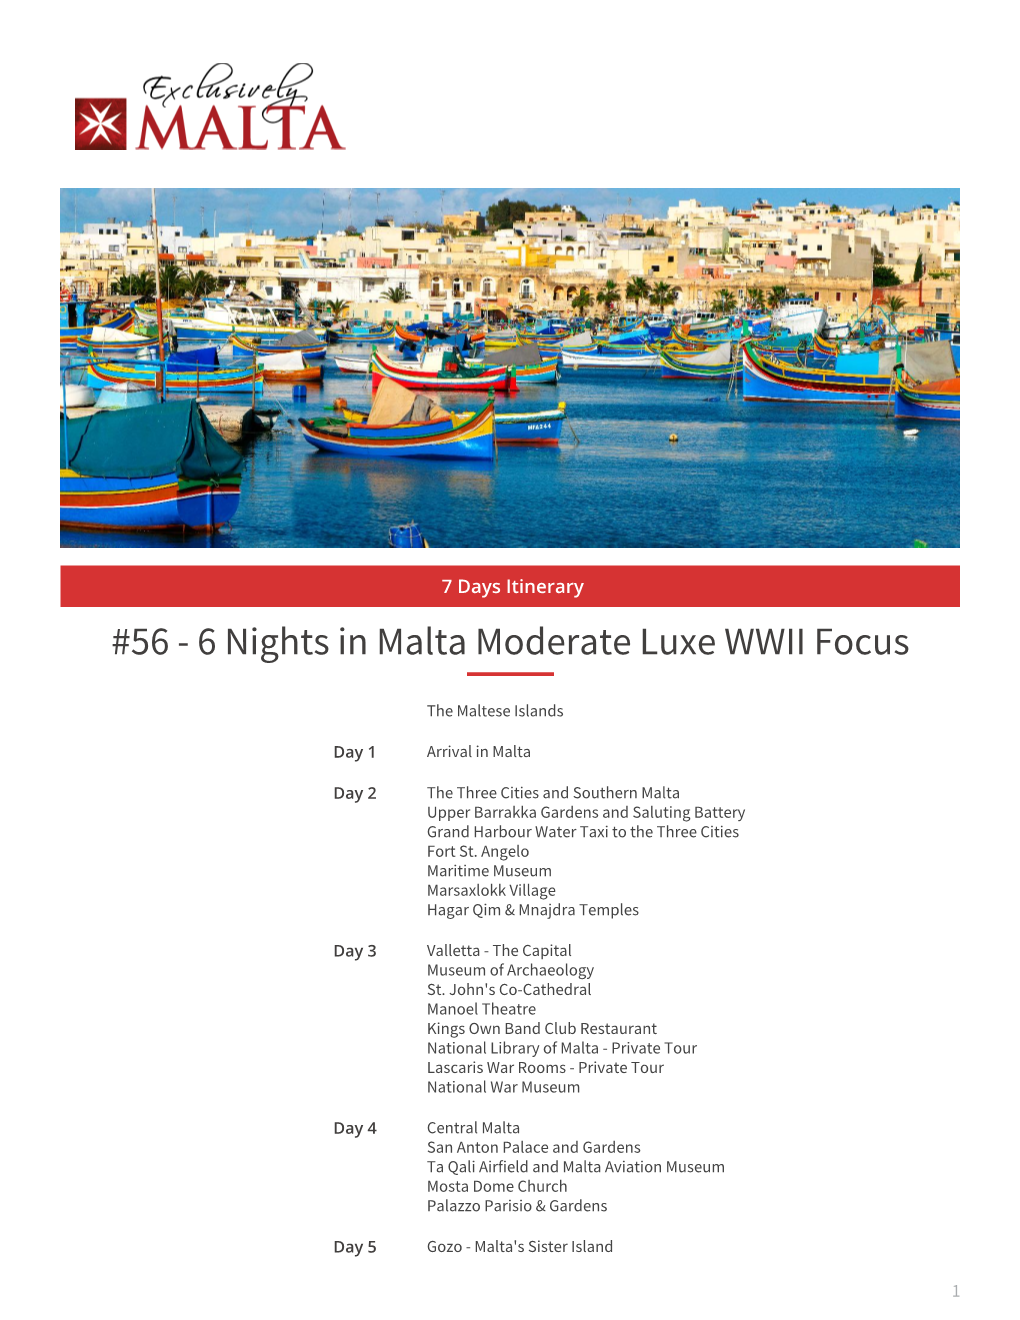 56 - 6 Nights in Malta Moderate Luxe WWII Focus